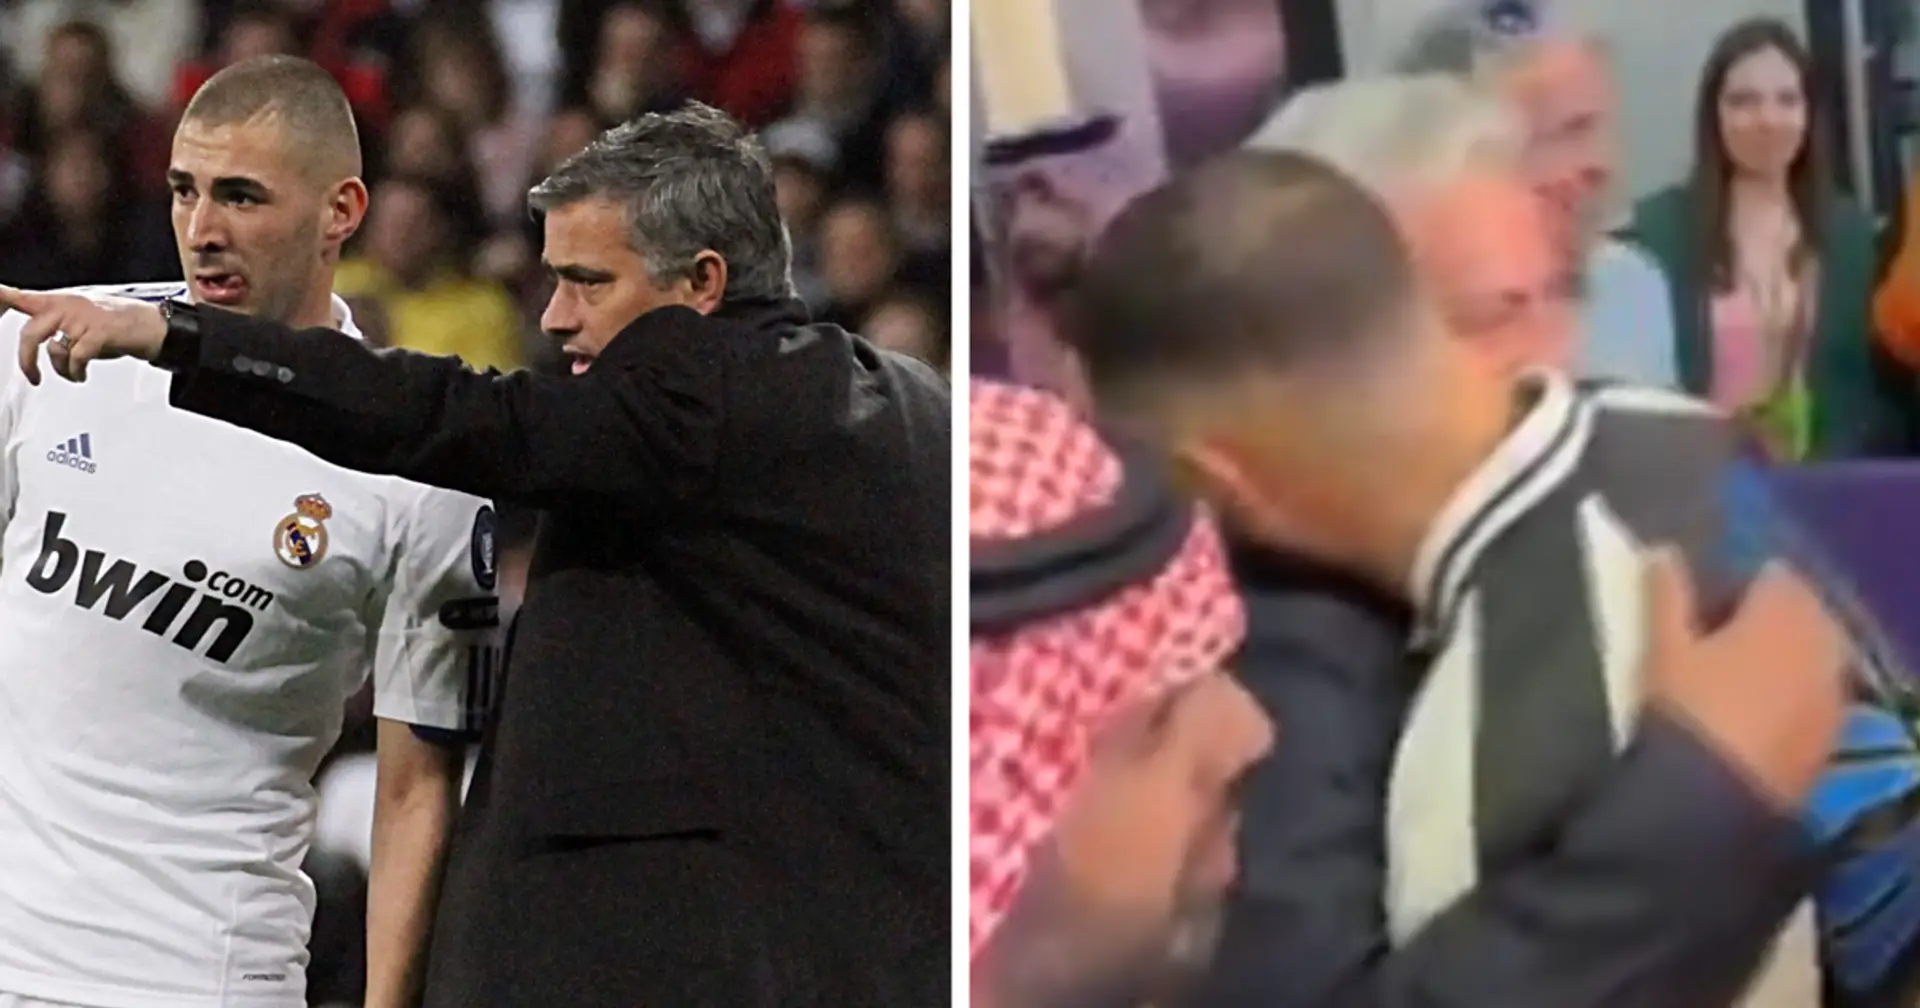 Karim Benzema and Jose Mourinho reunited! Real Madrid legends share warm embrace in touching moment